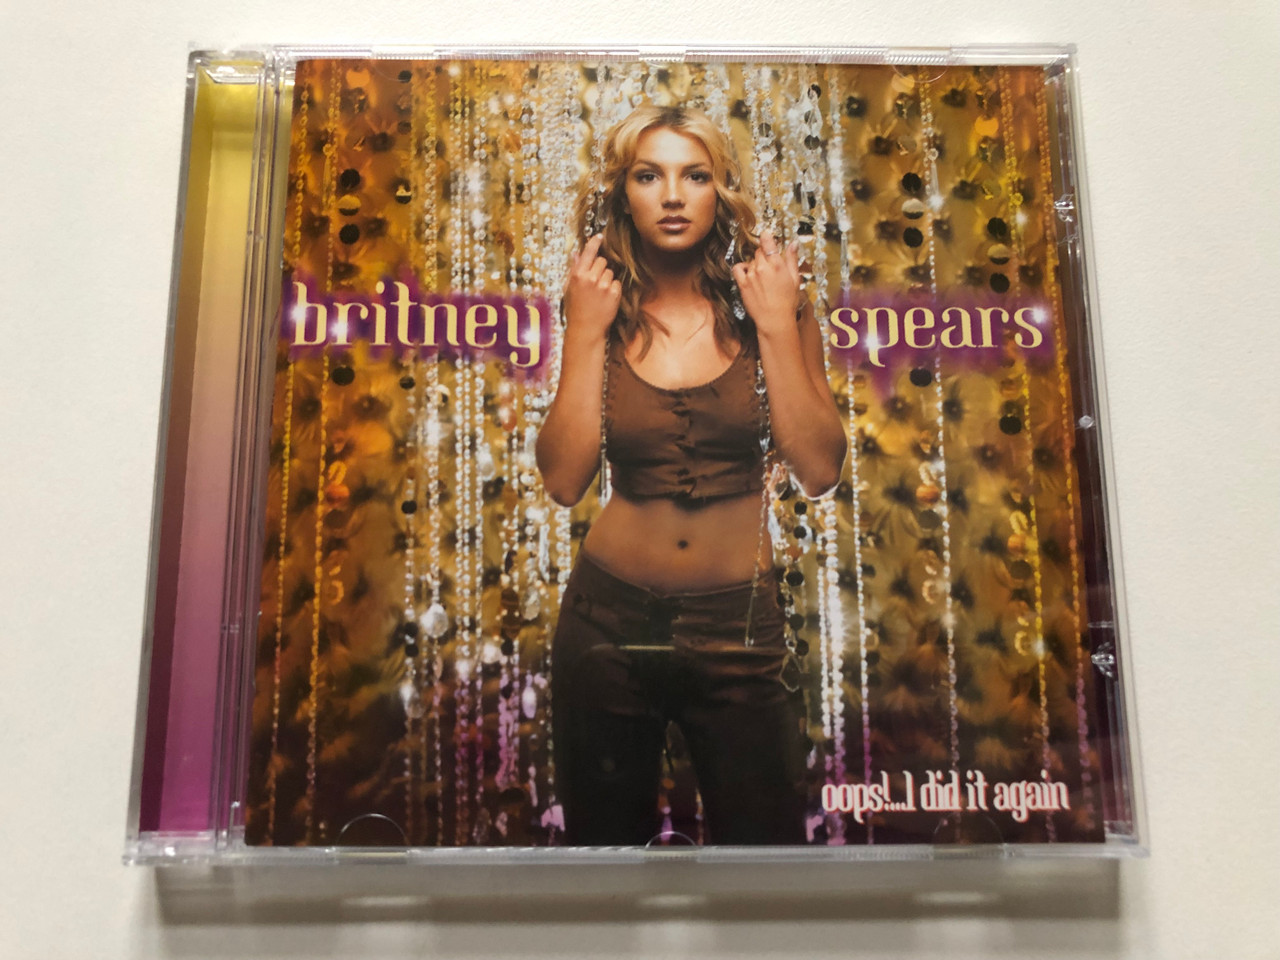 https://cdn10.bigcommerce.com/s-62bdpkt7pb/products/0/images/312836/Britney_Spears_Oops...I_Did_It_Again_Jive_Audio_CD_2000_724384941925_1__88568.1700199338.1280.1280.JPG?c=2